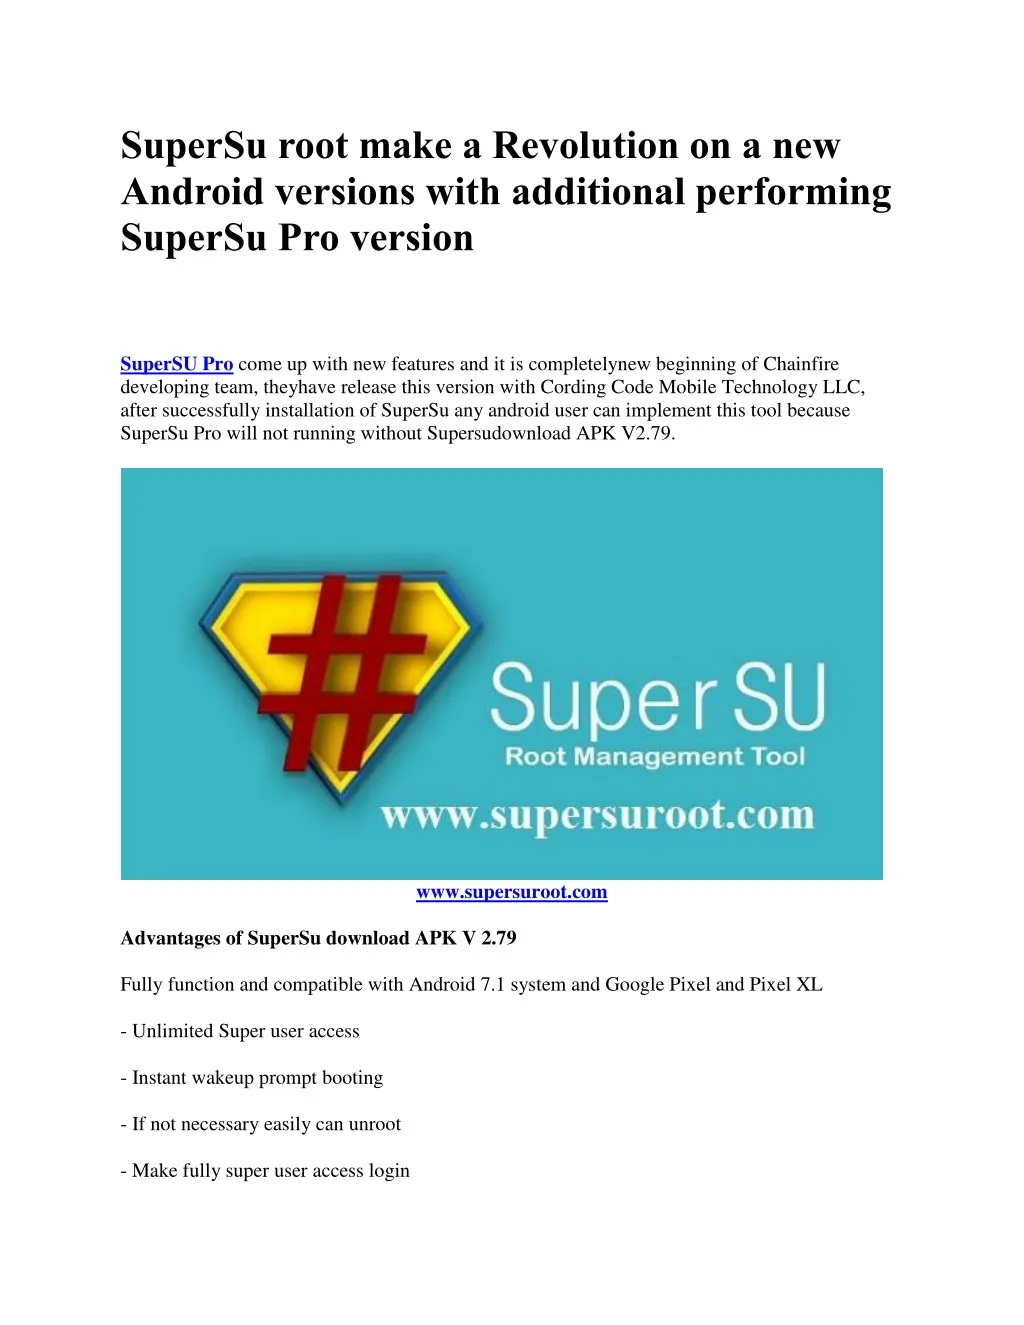 supersu root make a revolution on a new android